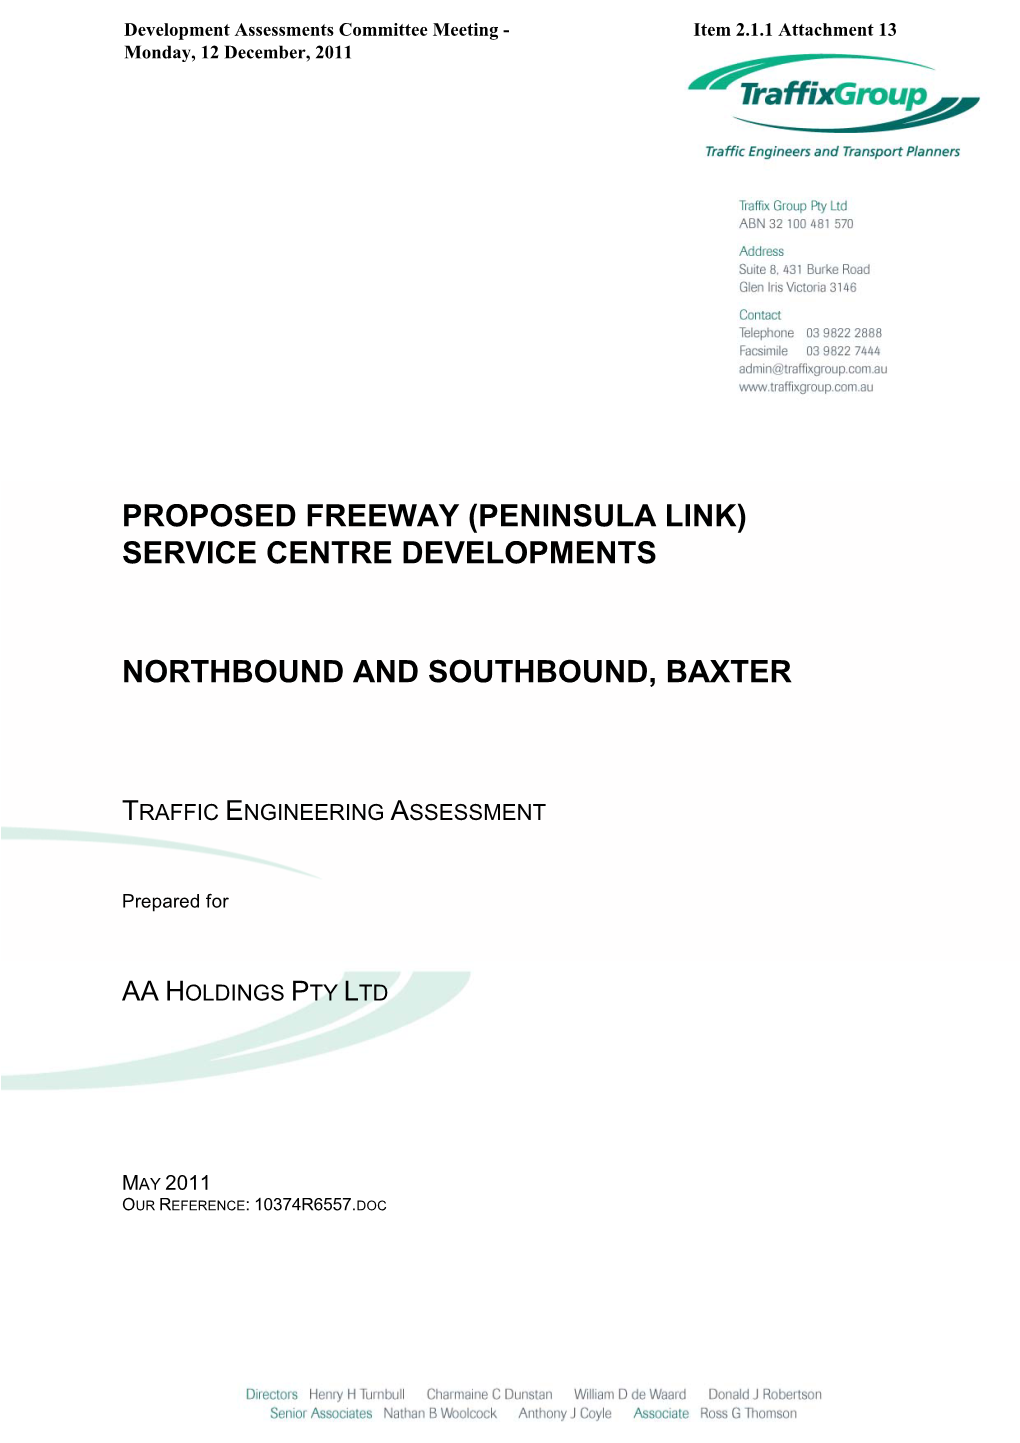 Proposed Freeway (Peninsula Link) Service Centre Developments Northbound and Southbound, Baxter